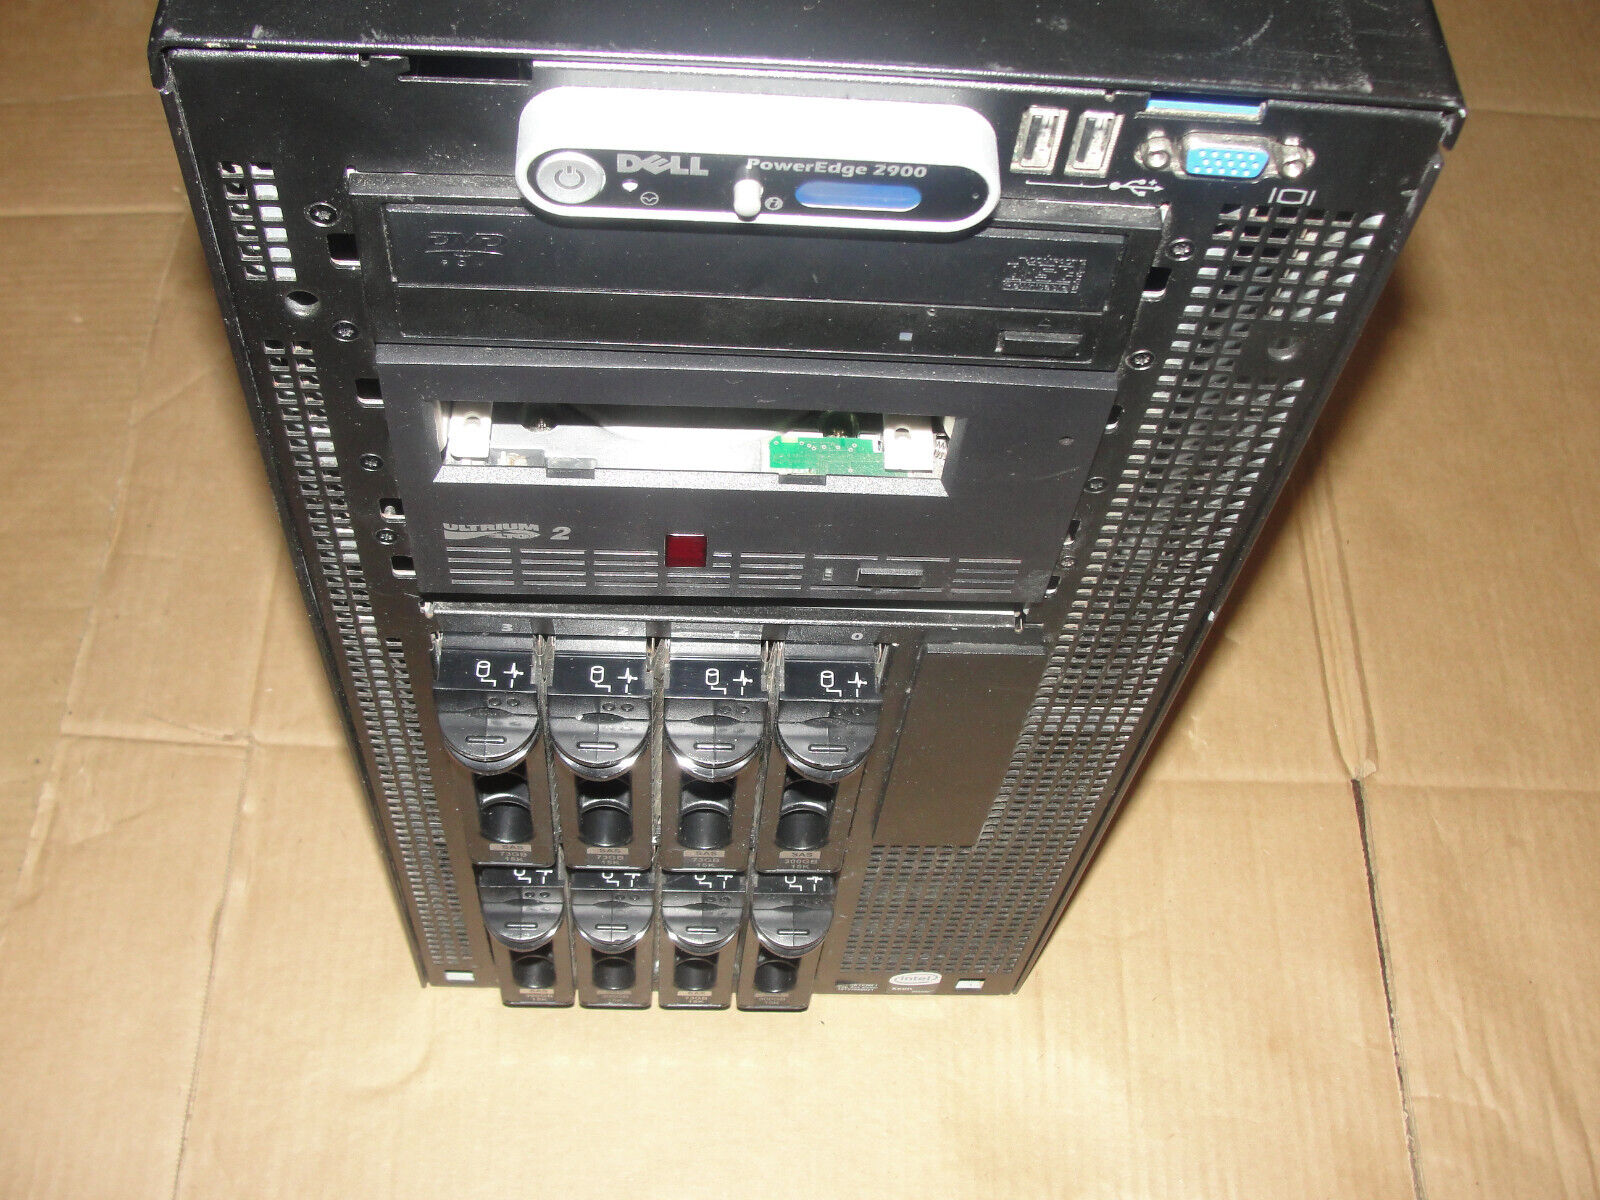 Dell PowerEdge 2900 Server 2.33GHz| 1GB RAM | NO HDD | TAPE DRIVE